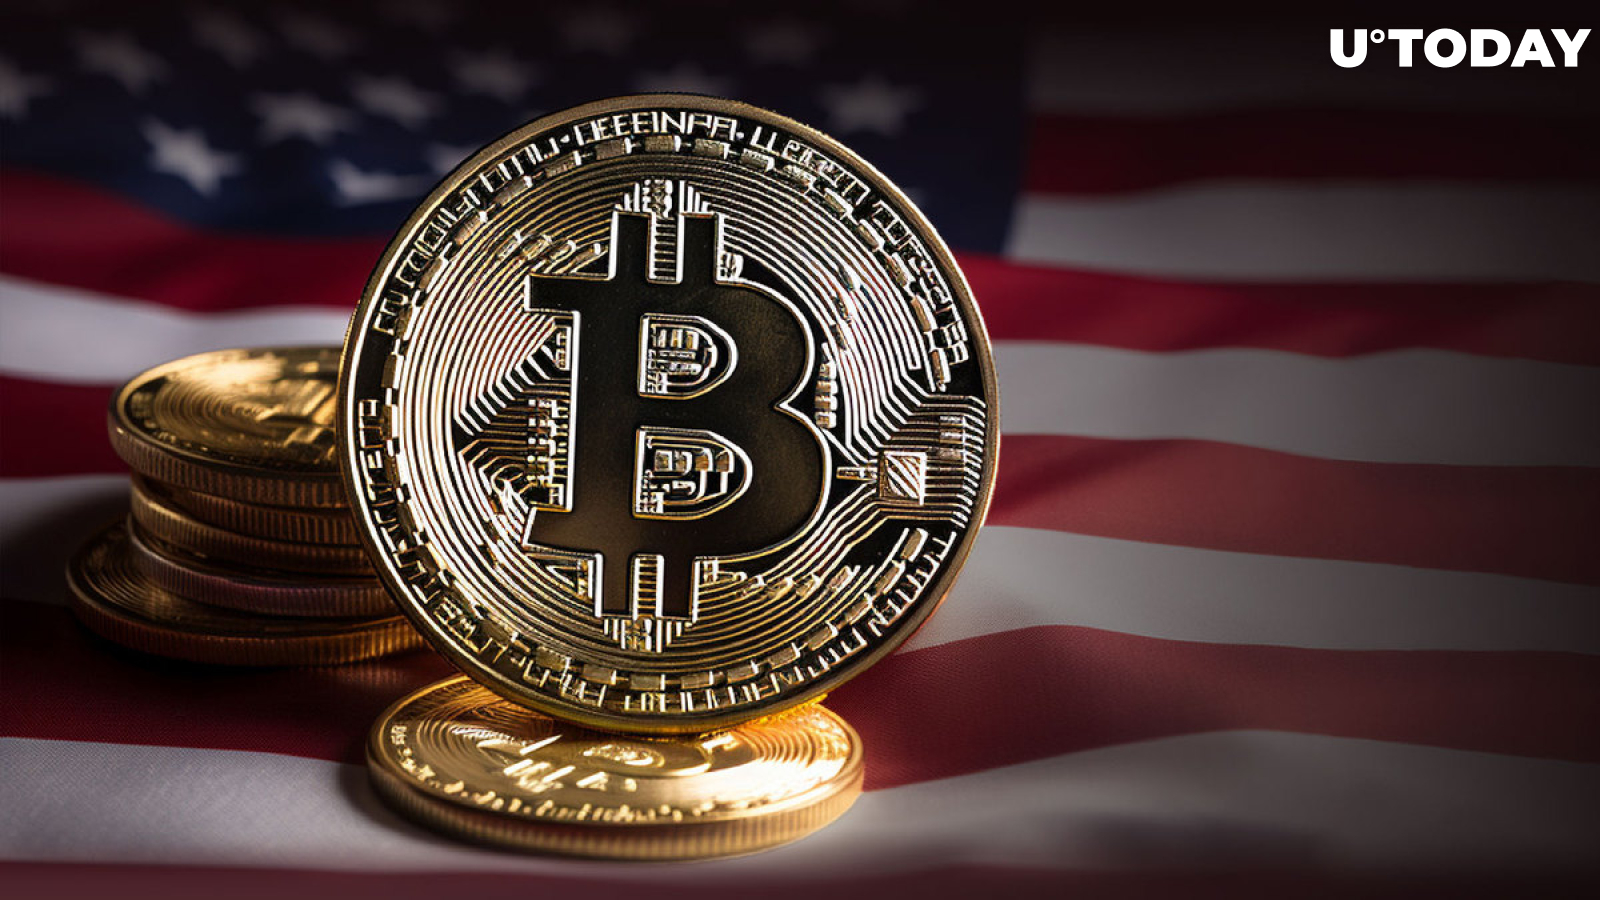 Another Seized $40 Million Bitcoin Moved by US Government